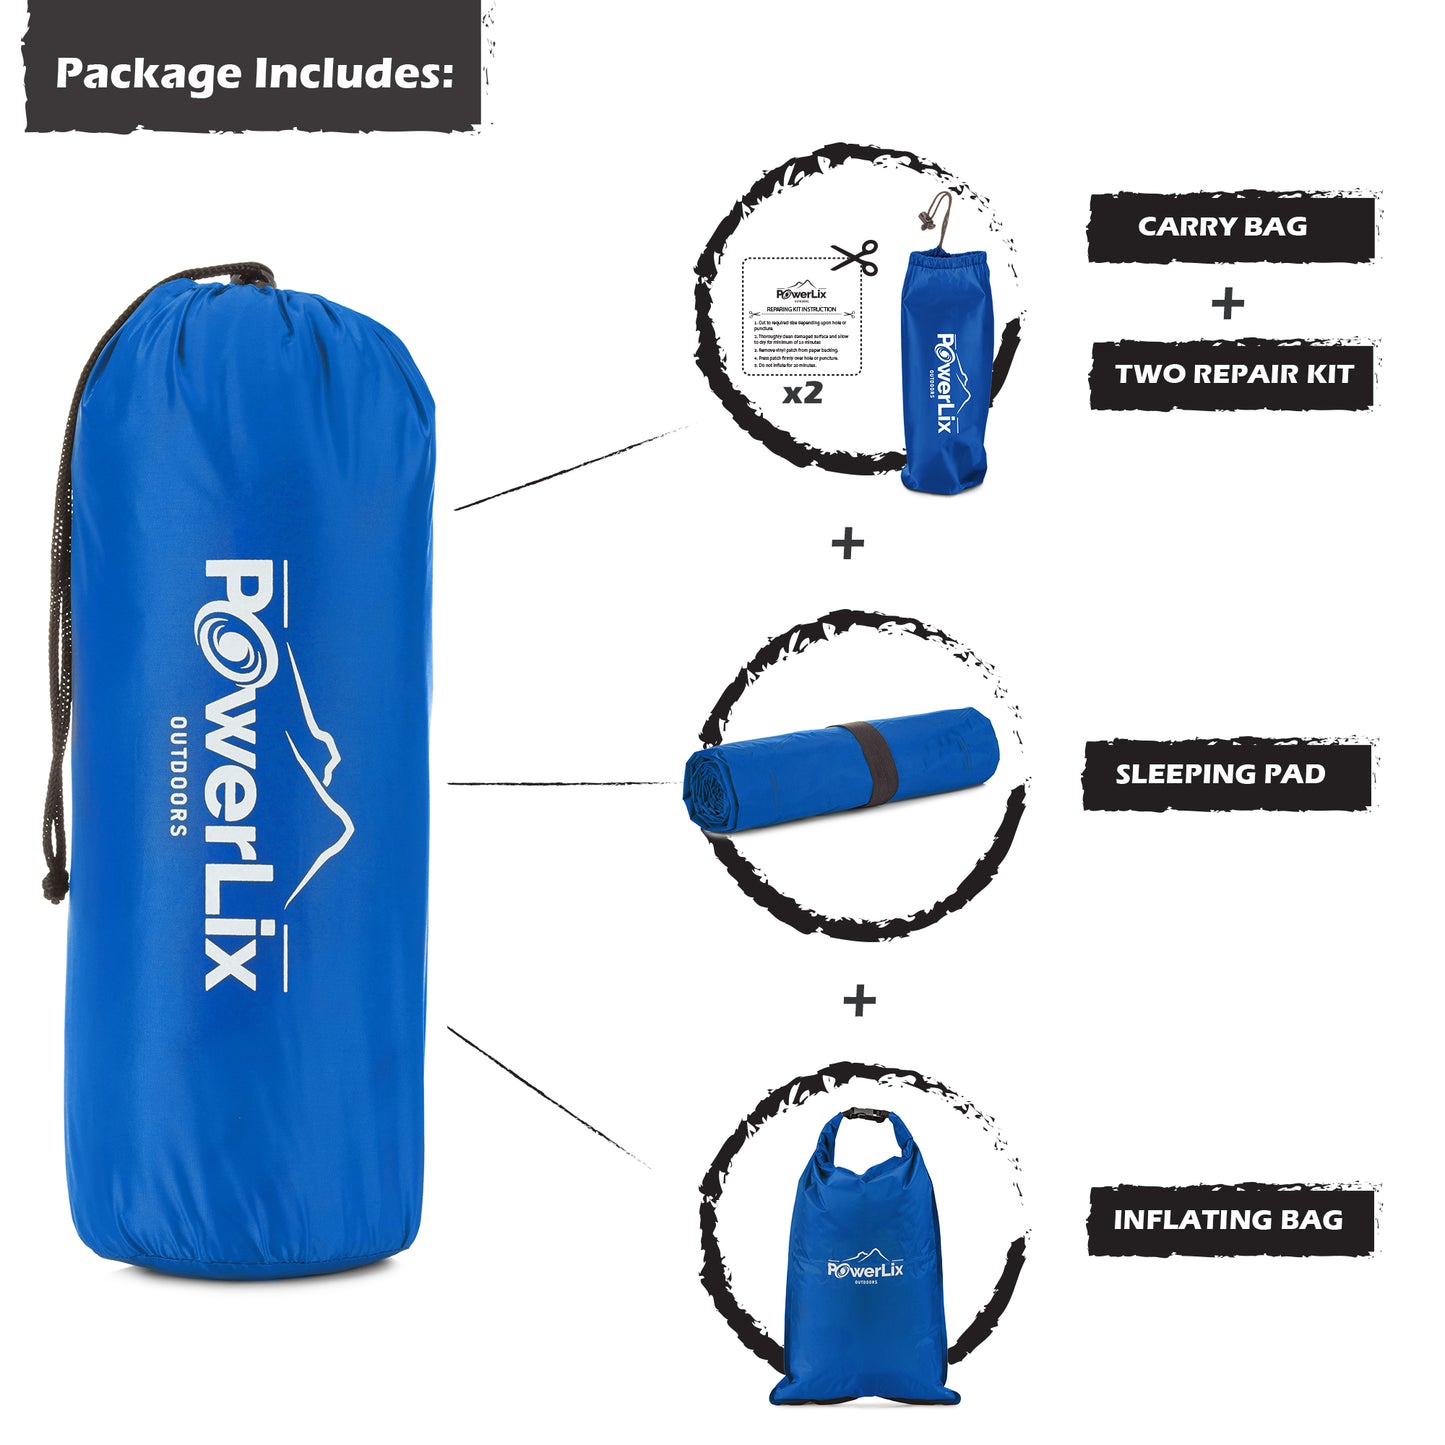 a blue bag with white text and black text with text: 'Package Includes: CARRY BAG PowerLix + REPAIRING KIT INSTRUCTION PowerLix 4. patch or p TWO REPAIR KIT + PowerLix OUTDOORS SLEEPING PAD + INFLATING BAG PowerLix'